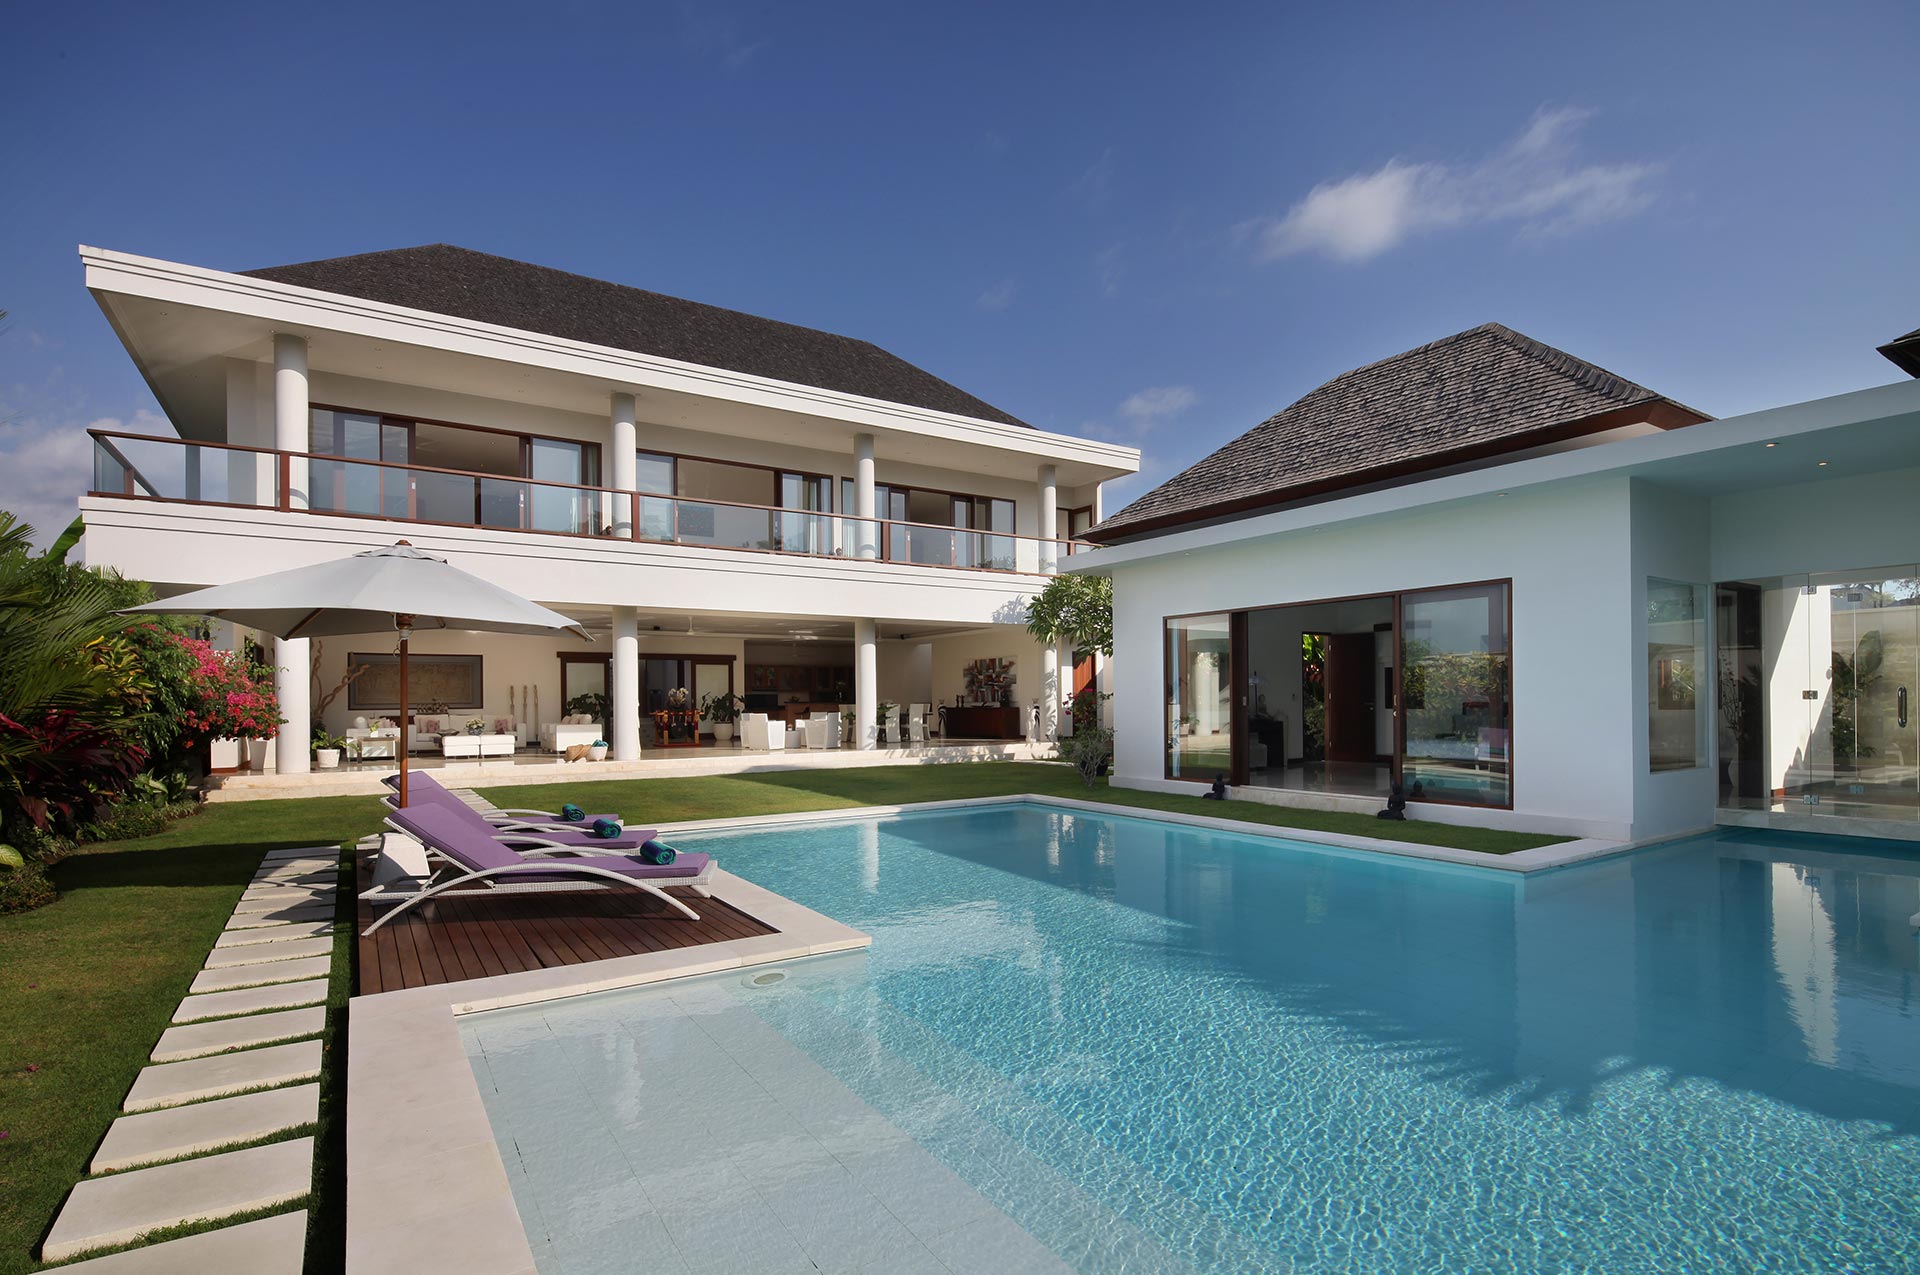 Istana Putih means “The White Palace” which is exactly what you will get when staying at this truly breathtaking 4+1 bedroom villa surrounded by stunning green rice fields of Bali – Canggu